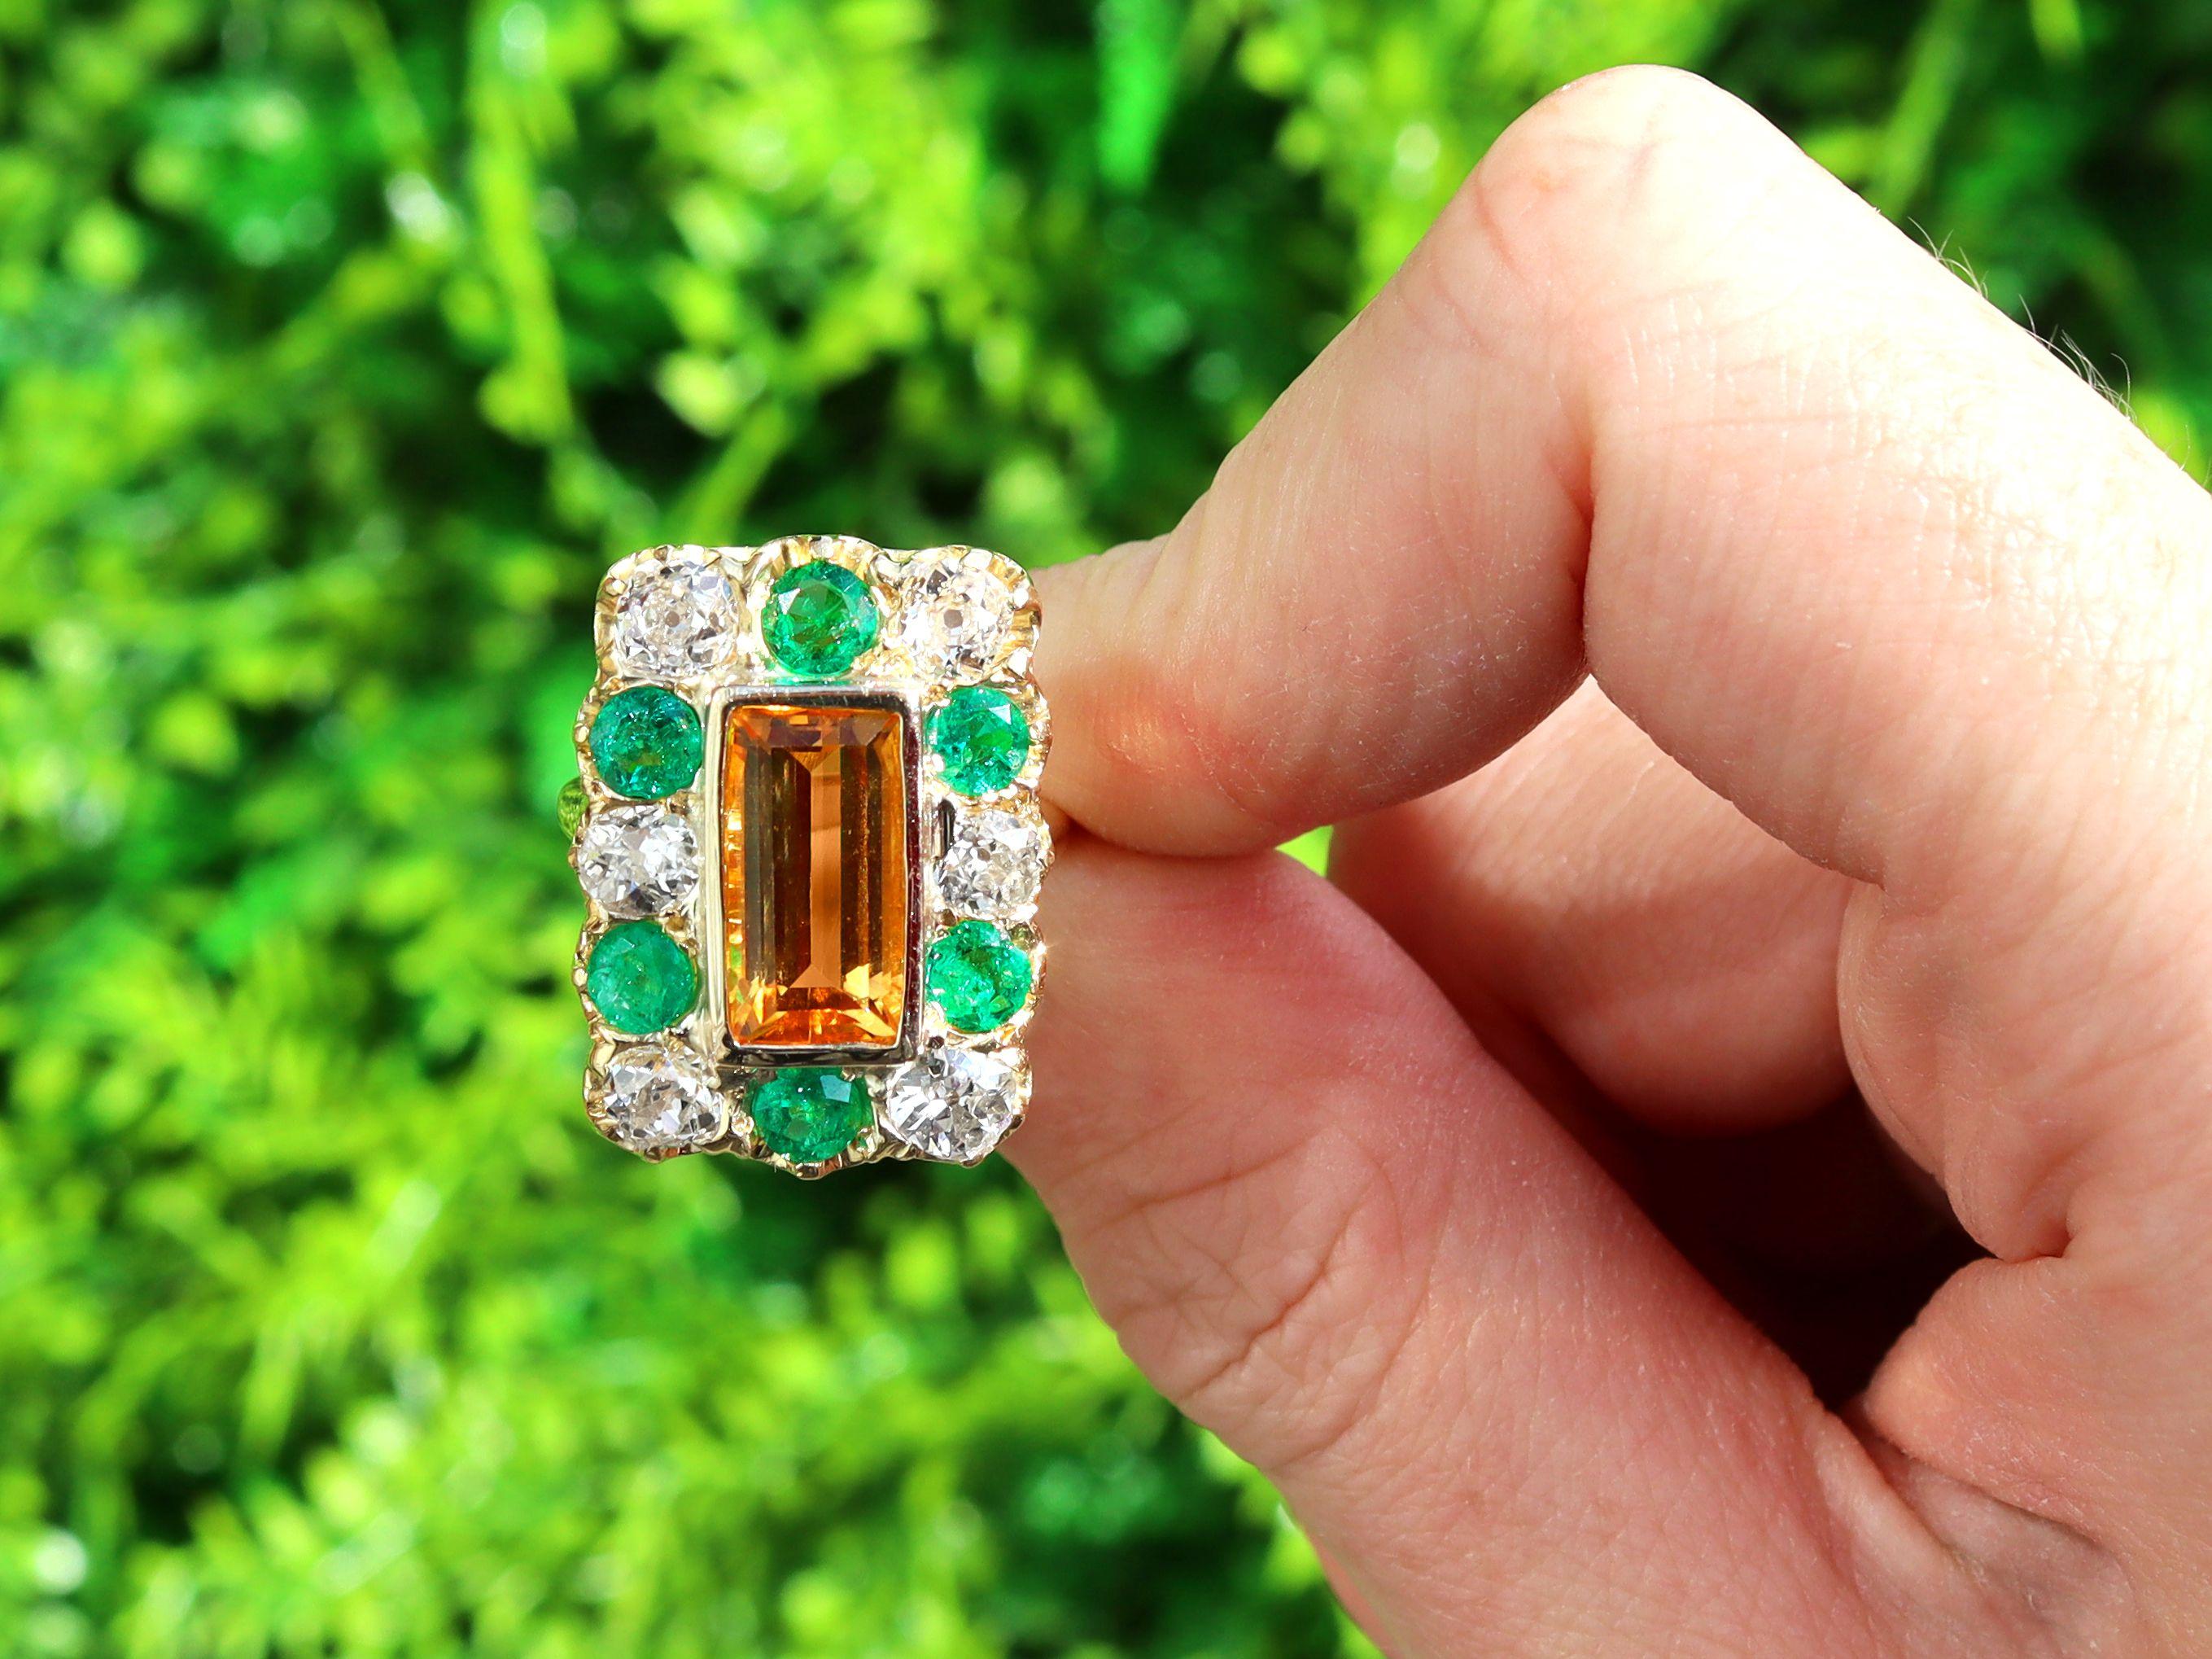 A stunning, fine and impressive 3.45 carat topaz, 1.86 carat emerald and 1.78 carat diamond, 18 karat yellow gold dress ring; part of our diverse gemstone jewellery collections

This stunning, fine and impressive antique gemstone ring has been